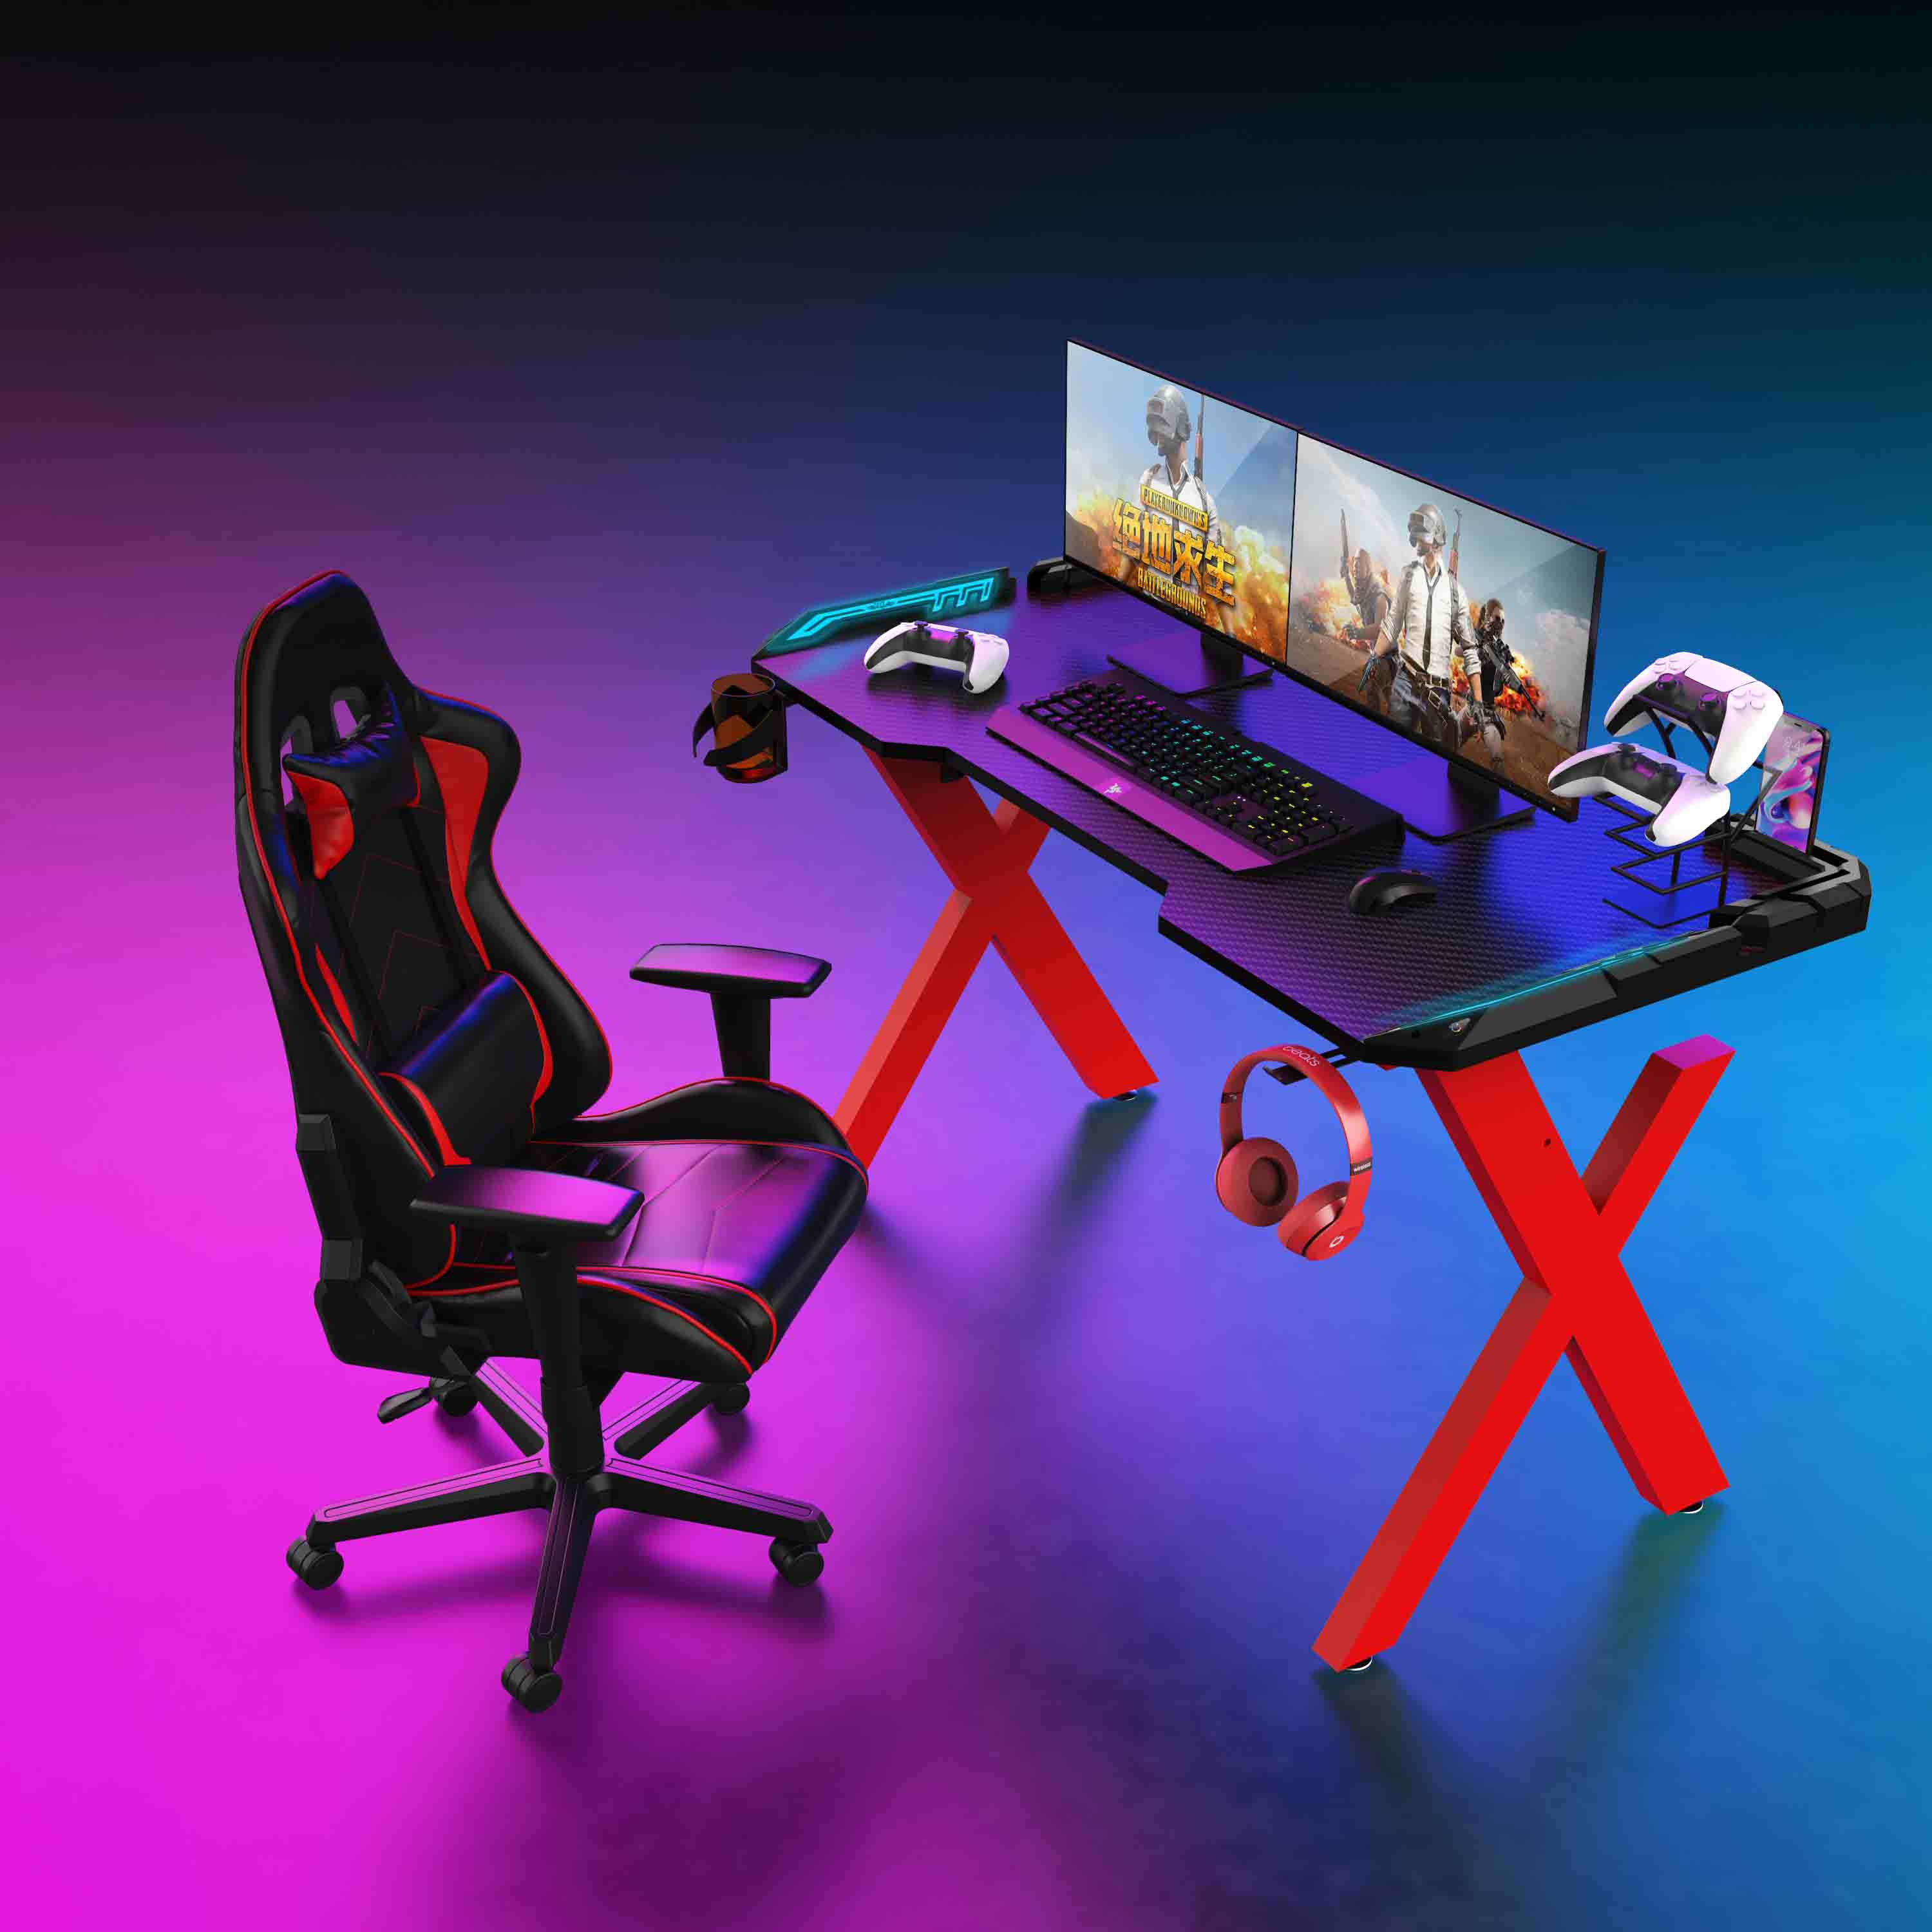 Red X-Shaped 55 anụ ọhịa Remote Control RGB LED Light Gaming Desk With black Armor